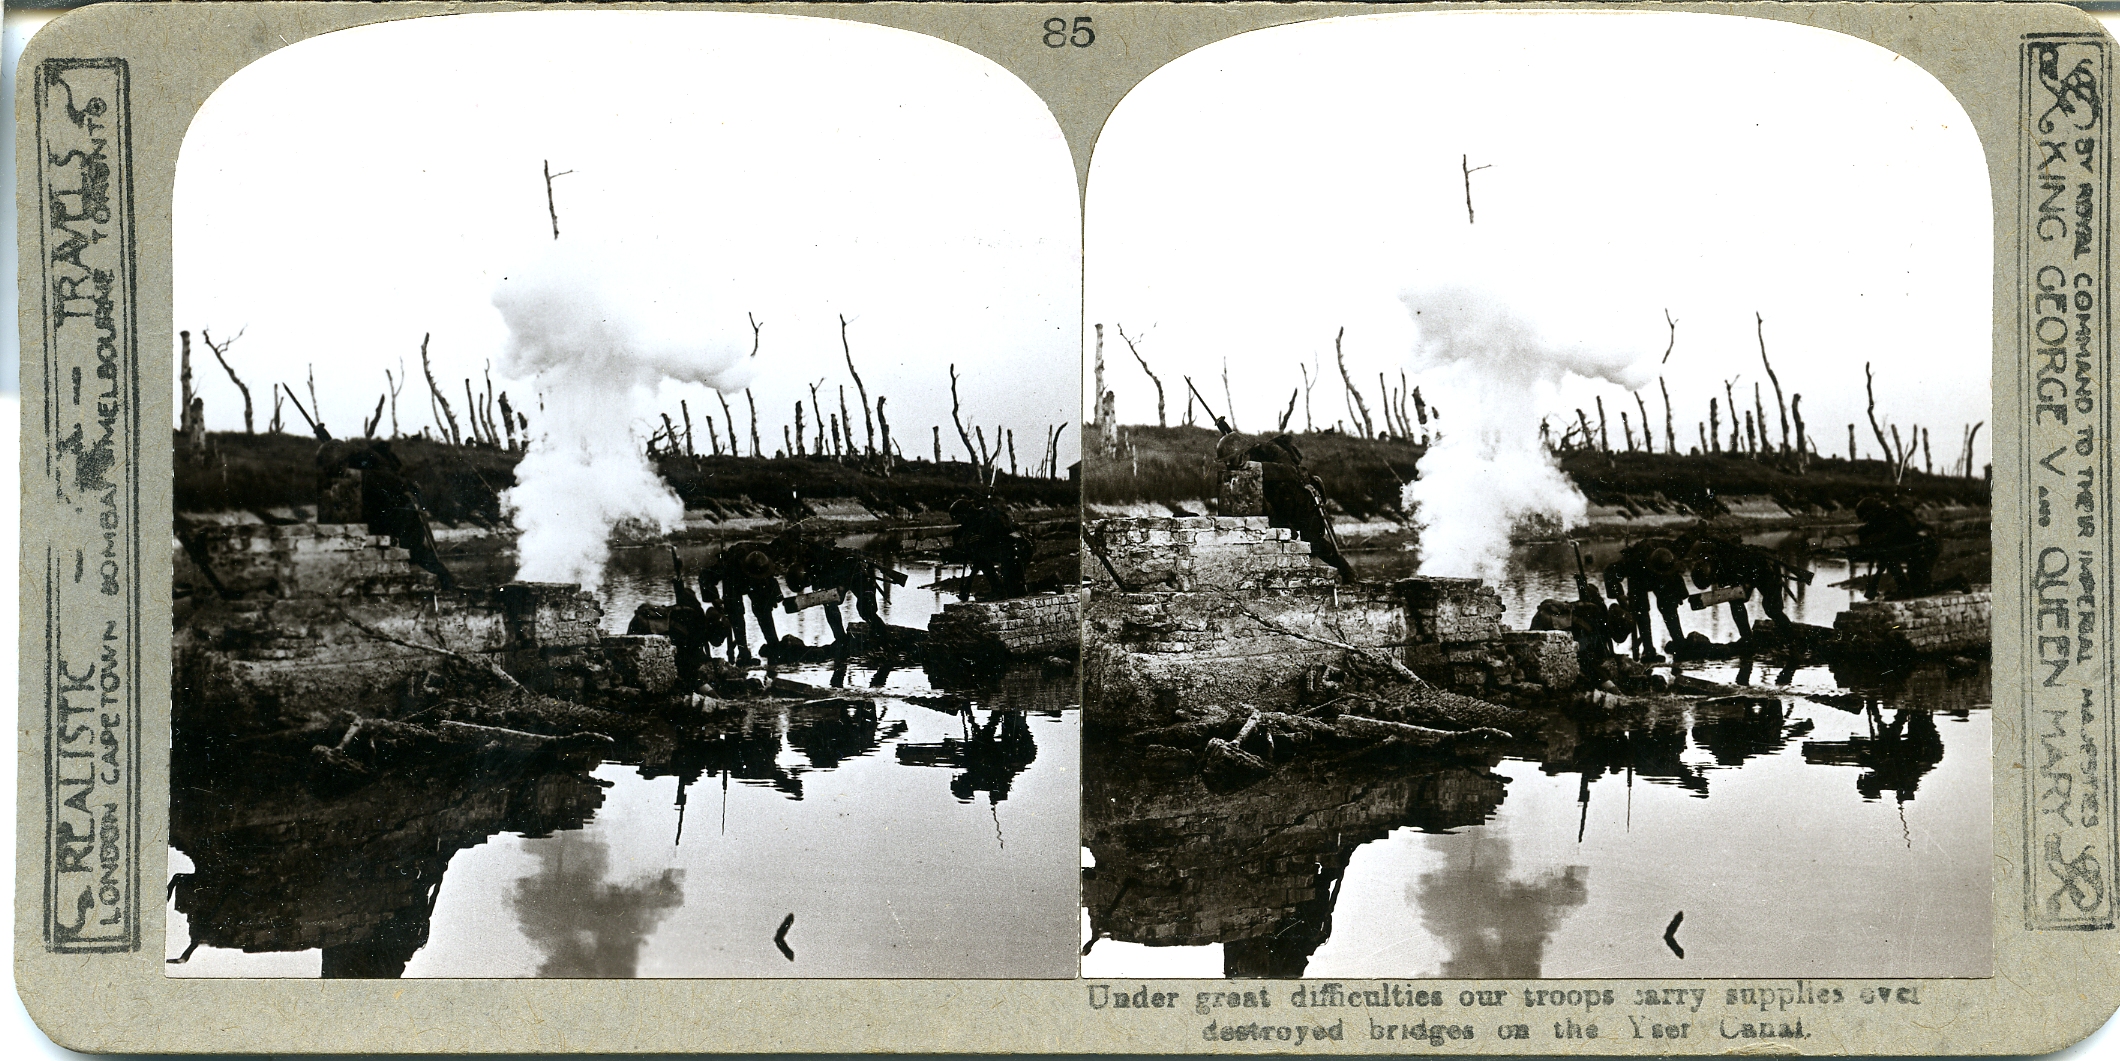 Under frightful difficulties, our troops carry supplies over destroyed bridges on Yser Canal